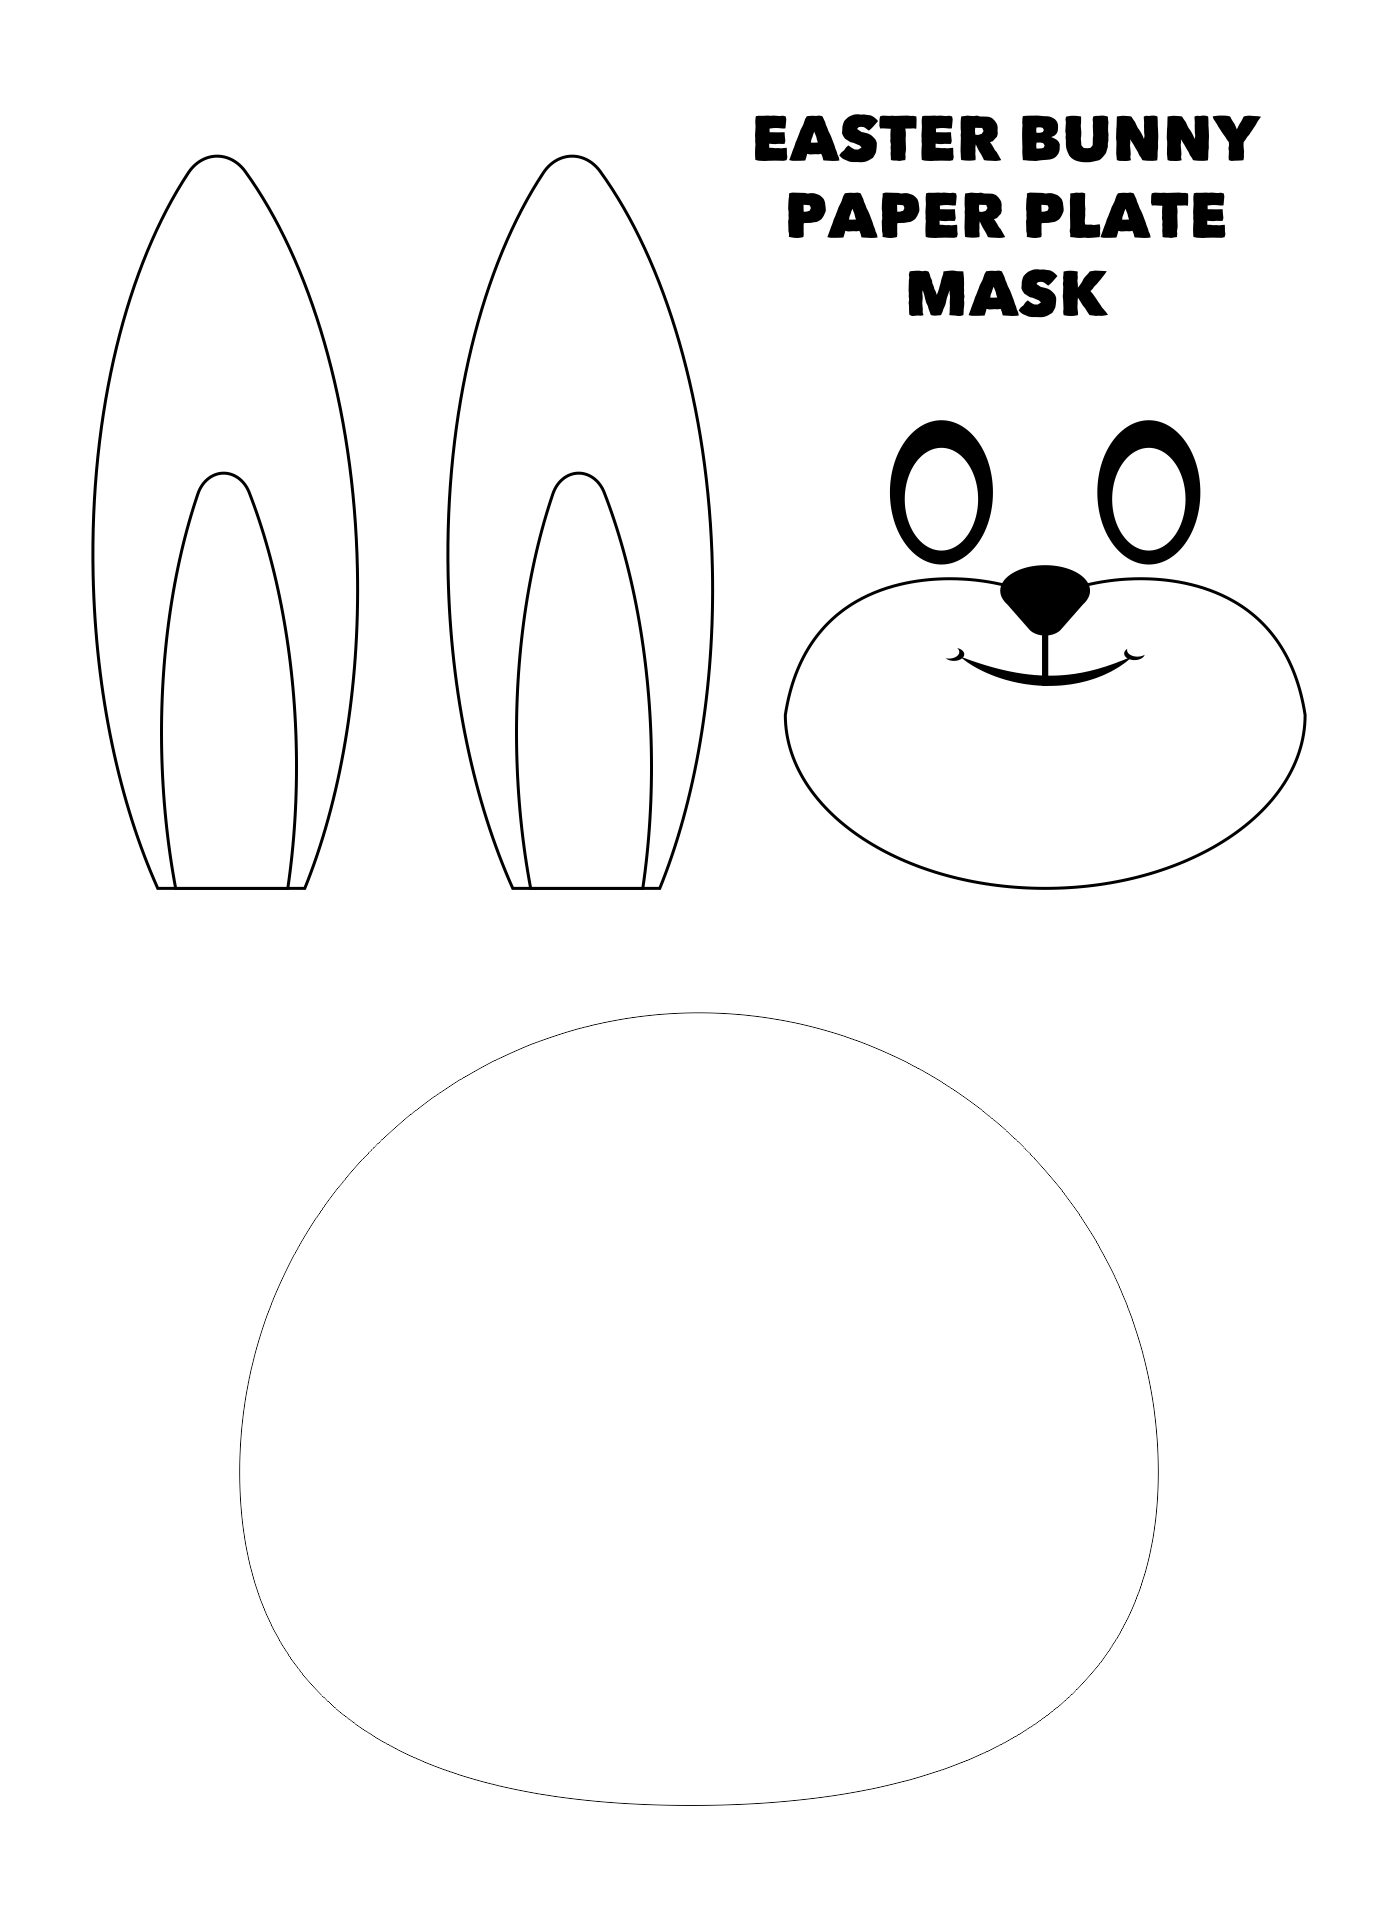 Printable Easter Bunny Paper Plate Mask